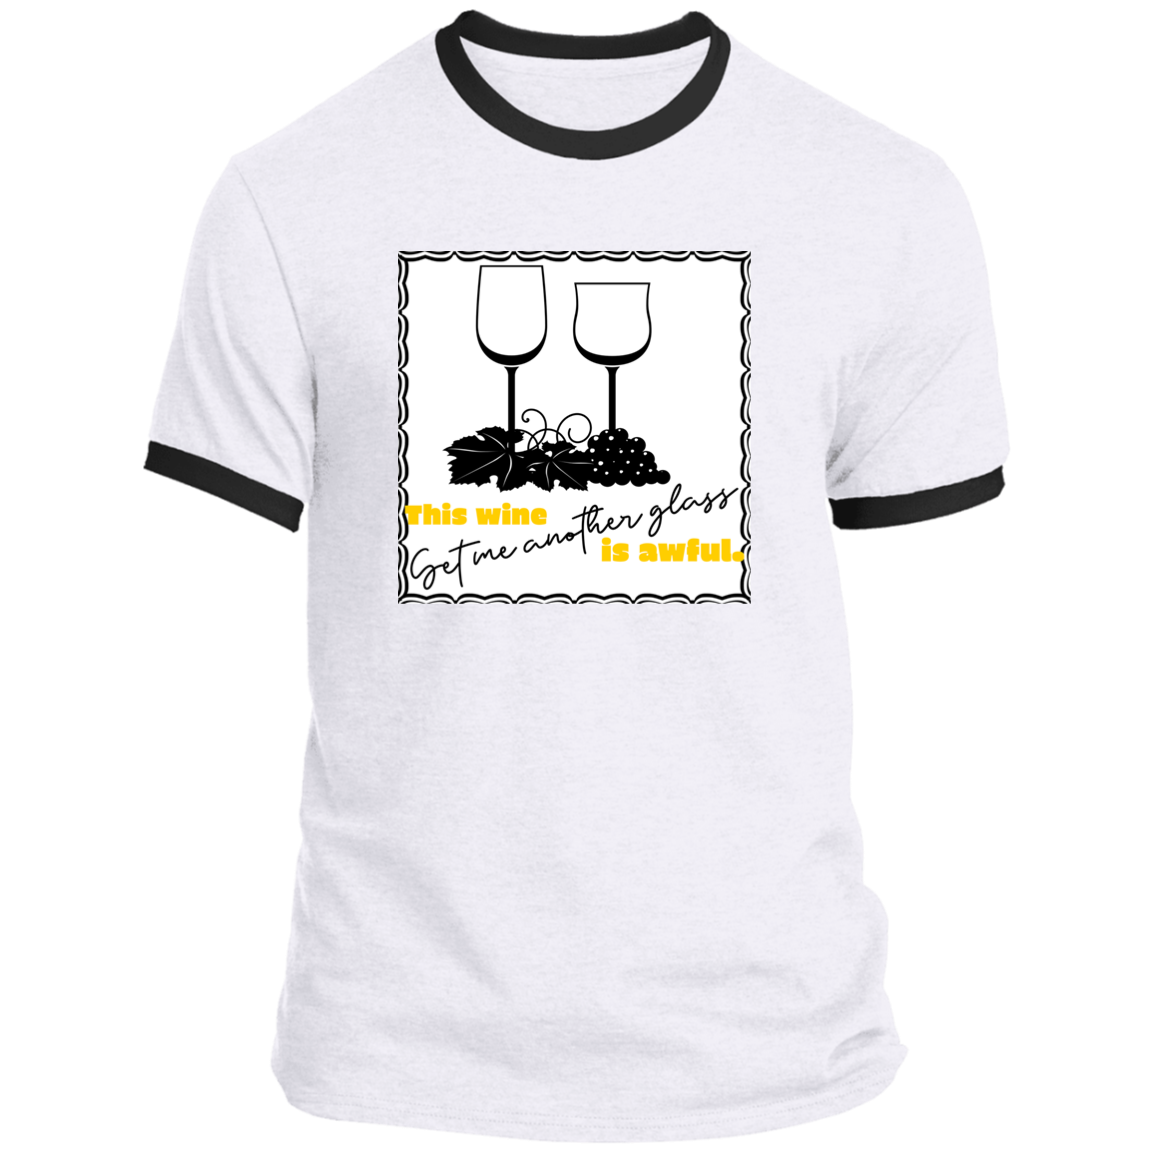 This Wine is Awful. Get Me Another Glass. - Unisex Ringer Tee PC54R